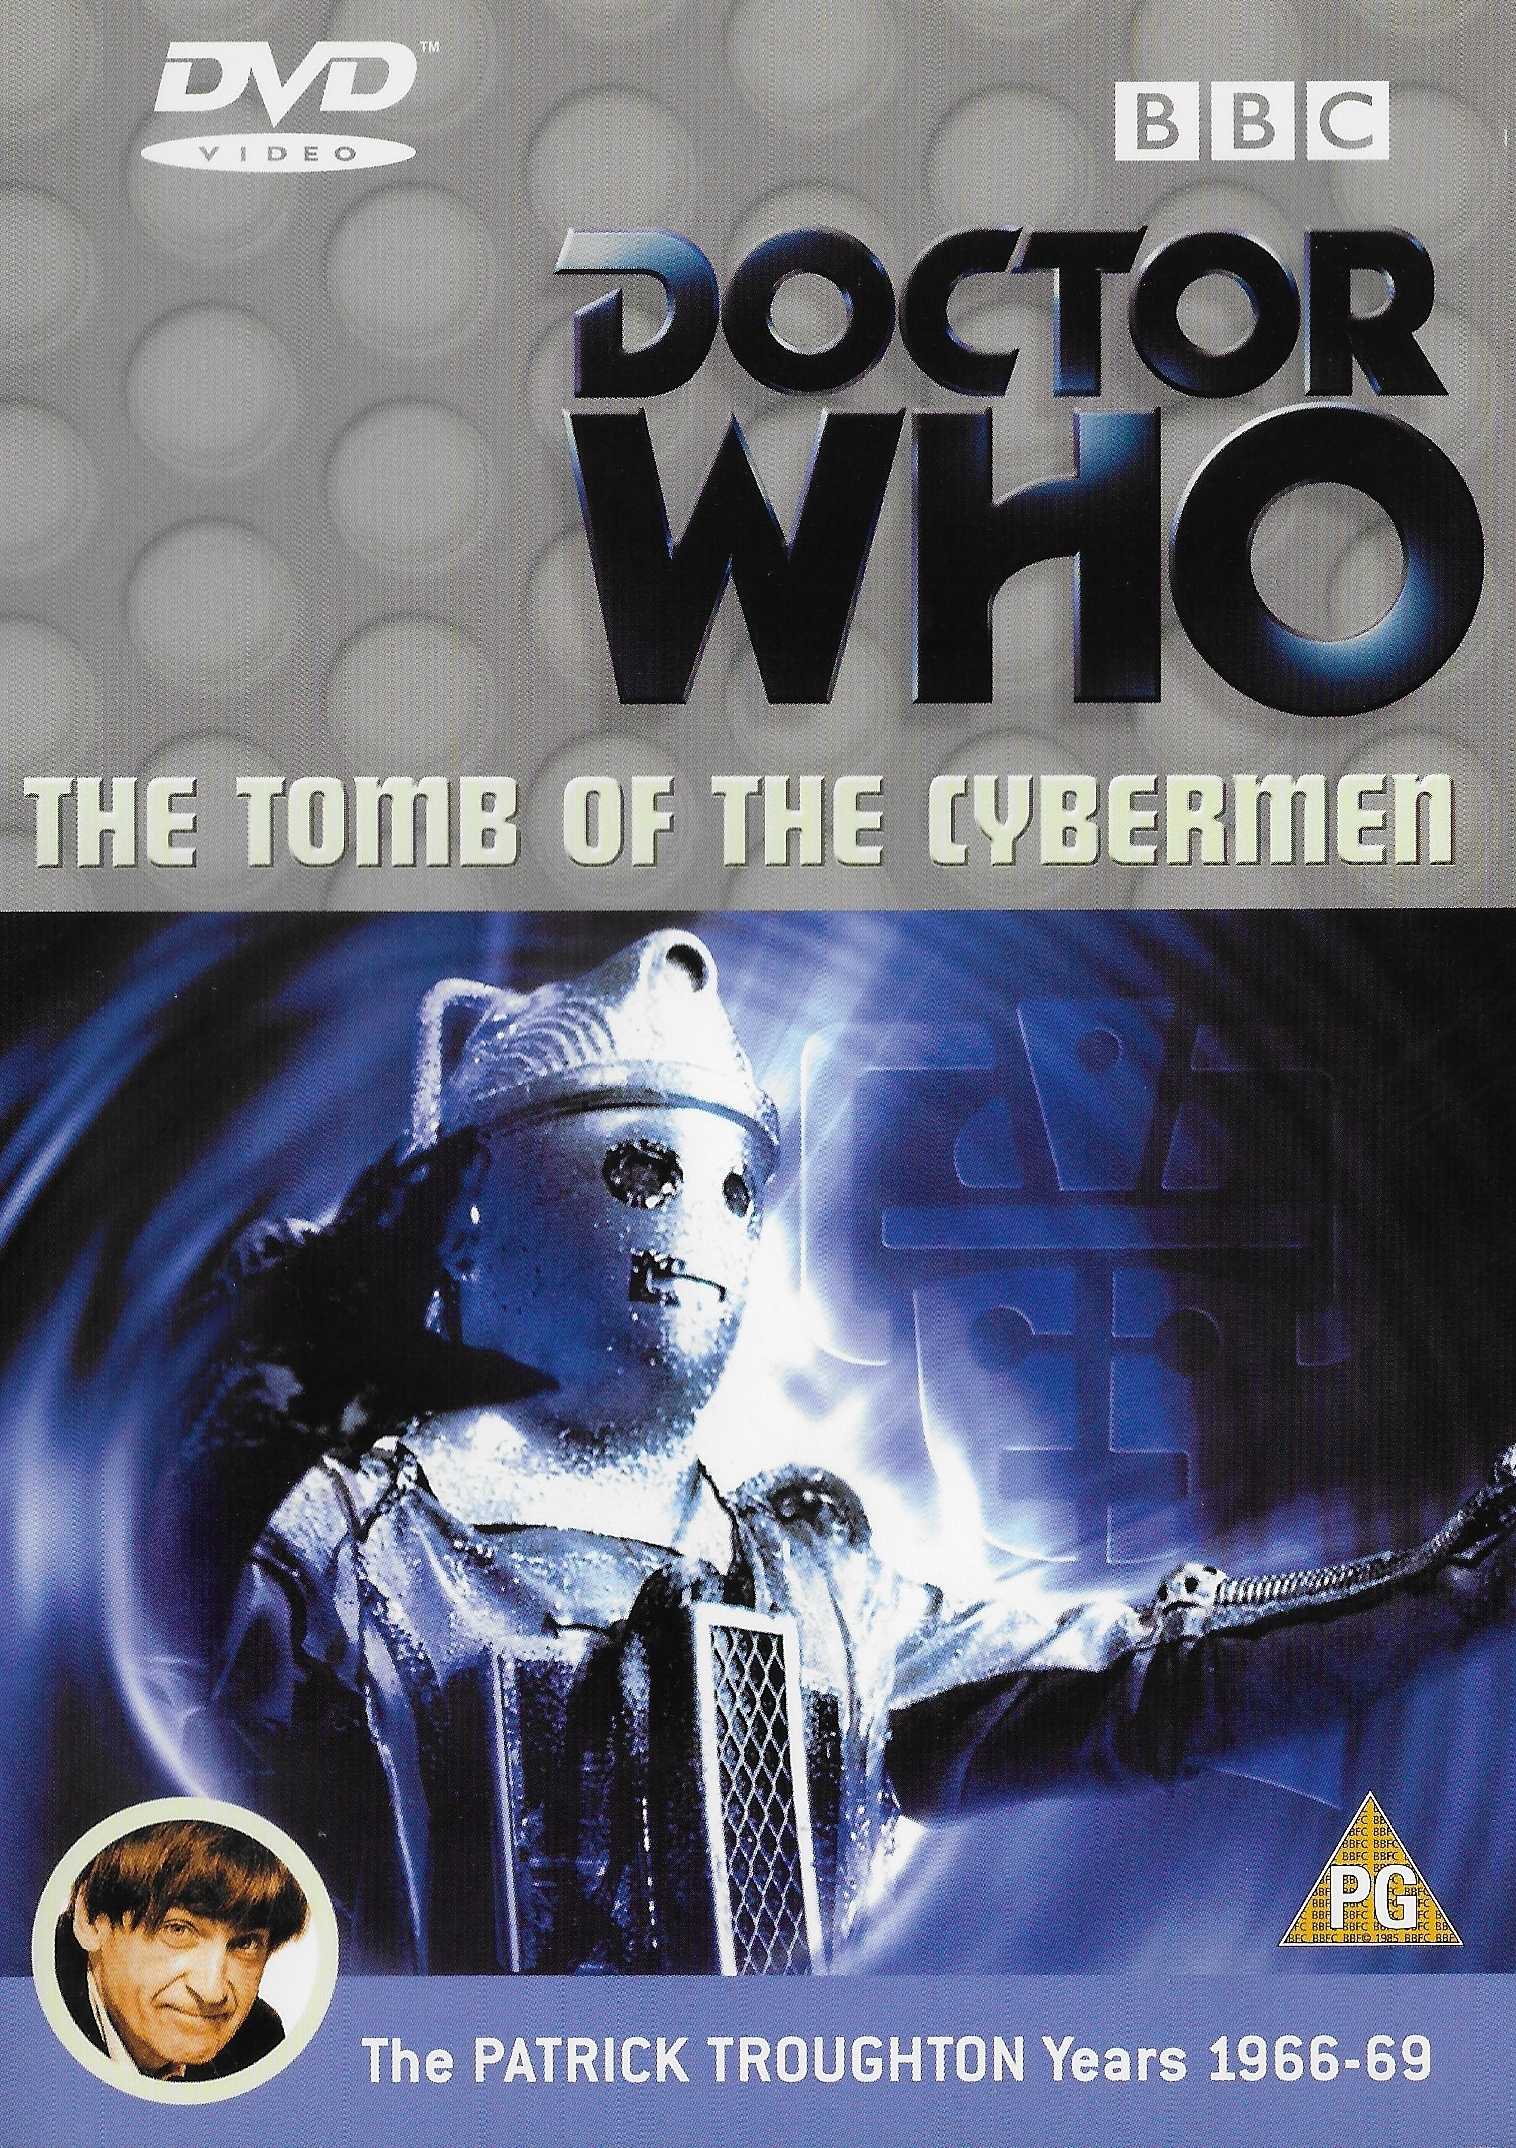 Picture of Doctor Who - The tomb of the Cybermen by artist Kit Pedler / Gerry Davis from the BBC dvds - Records and Tapes library